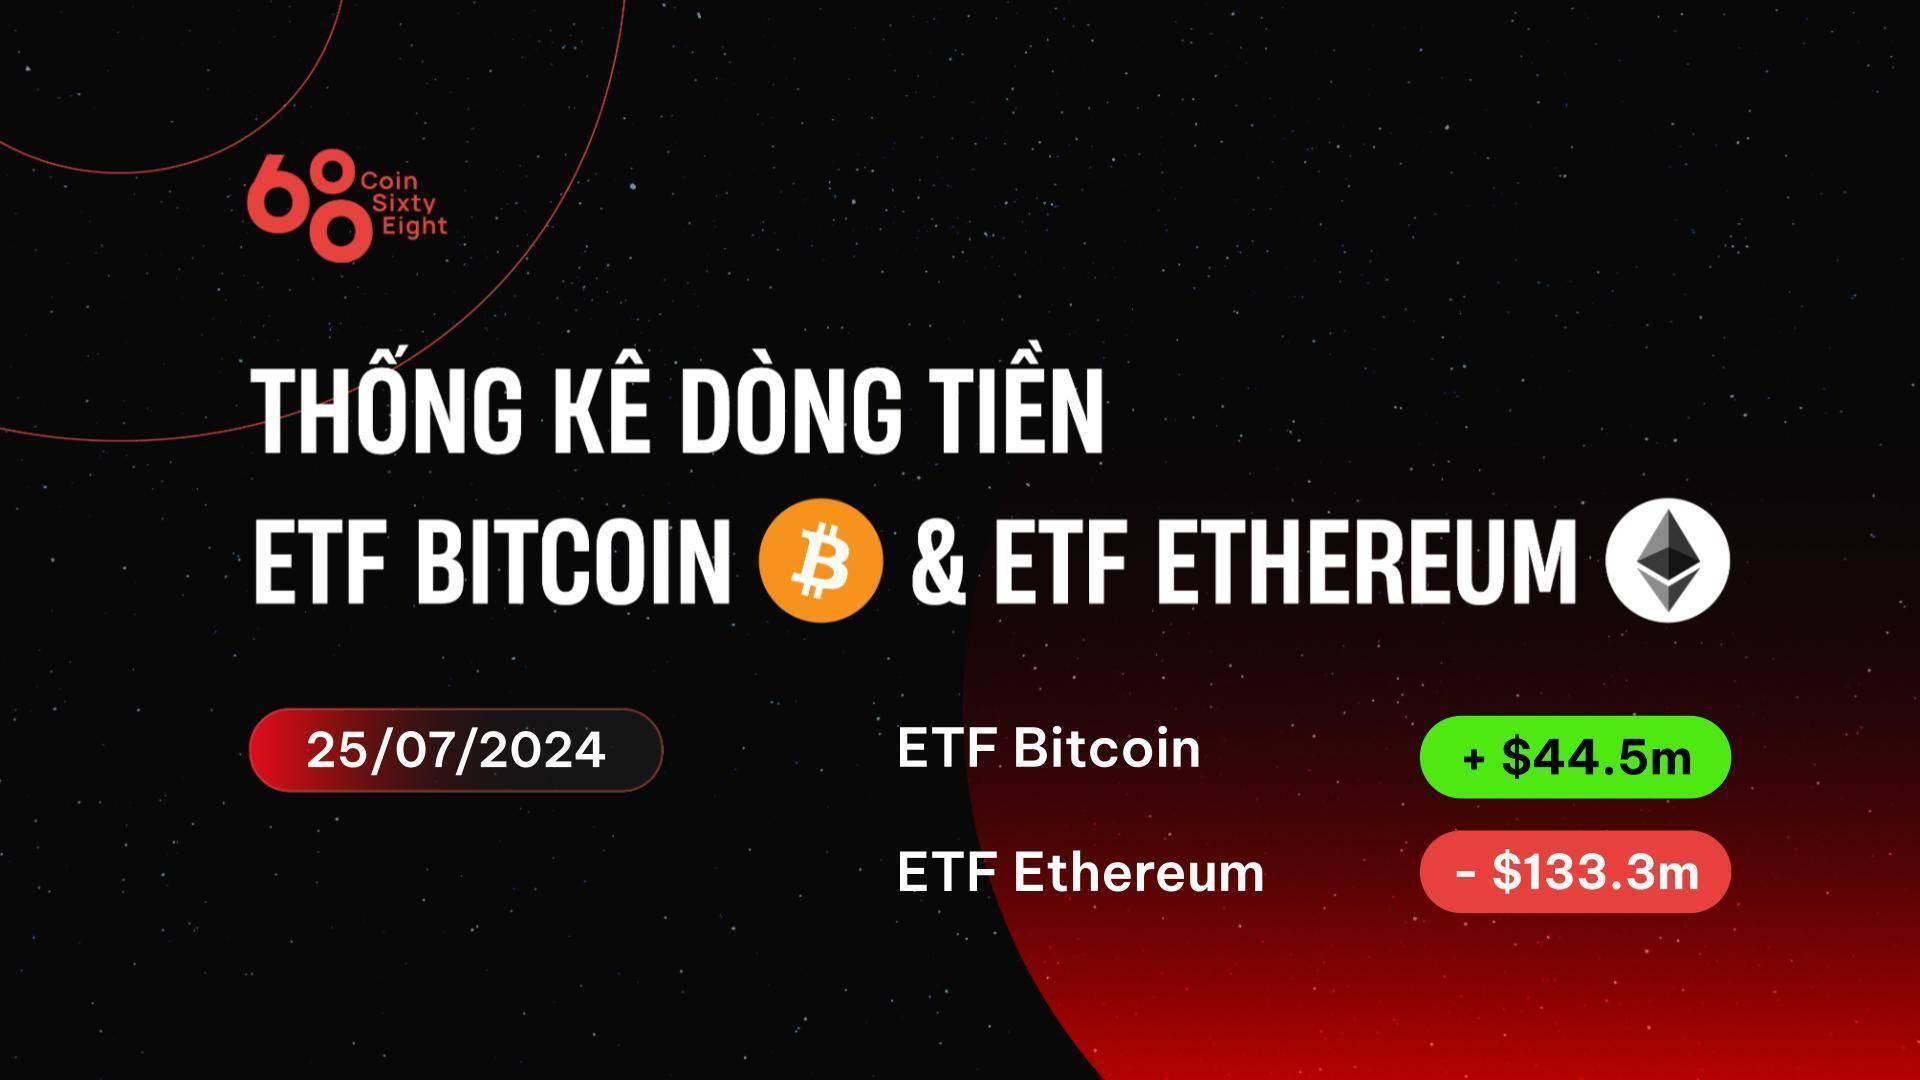 etf-bitcoin-thu-hut-lai-dong-tien-vao-etf-ethereum-co-ngay-outflow-dau-tien